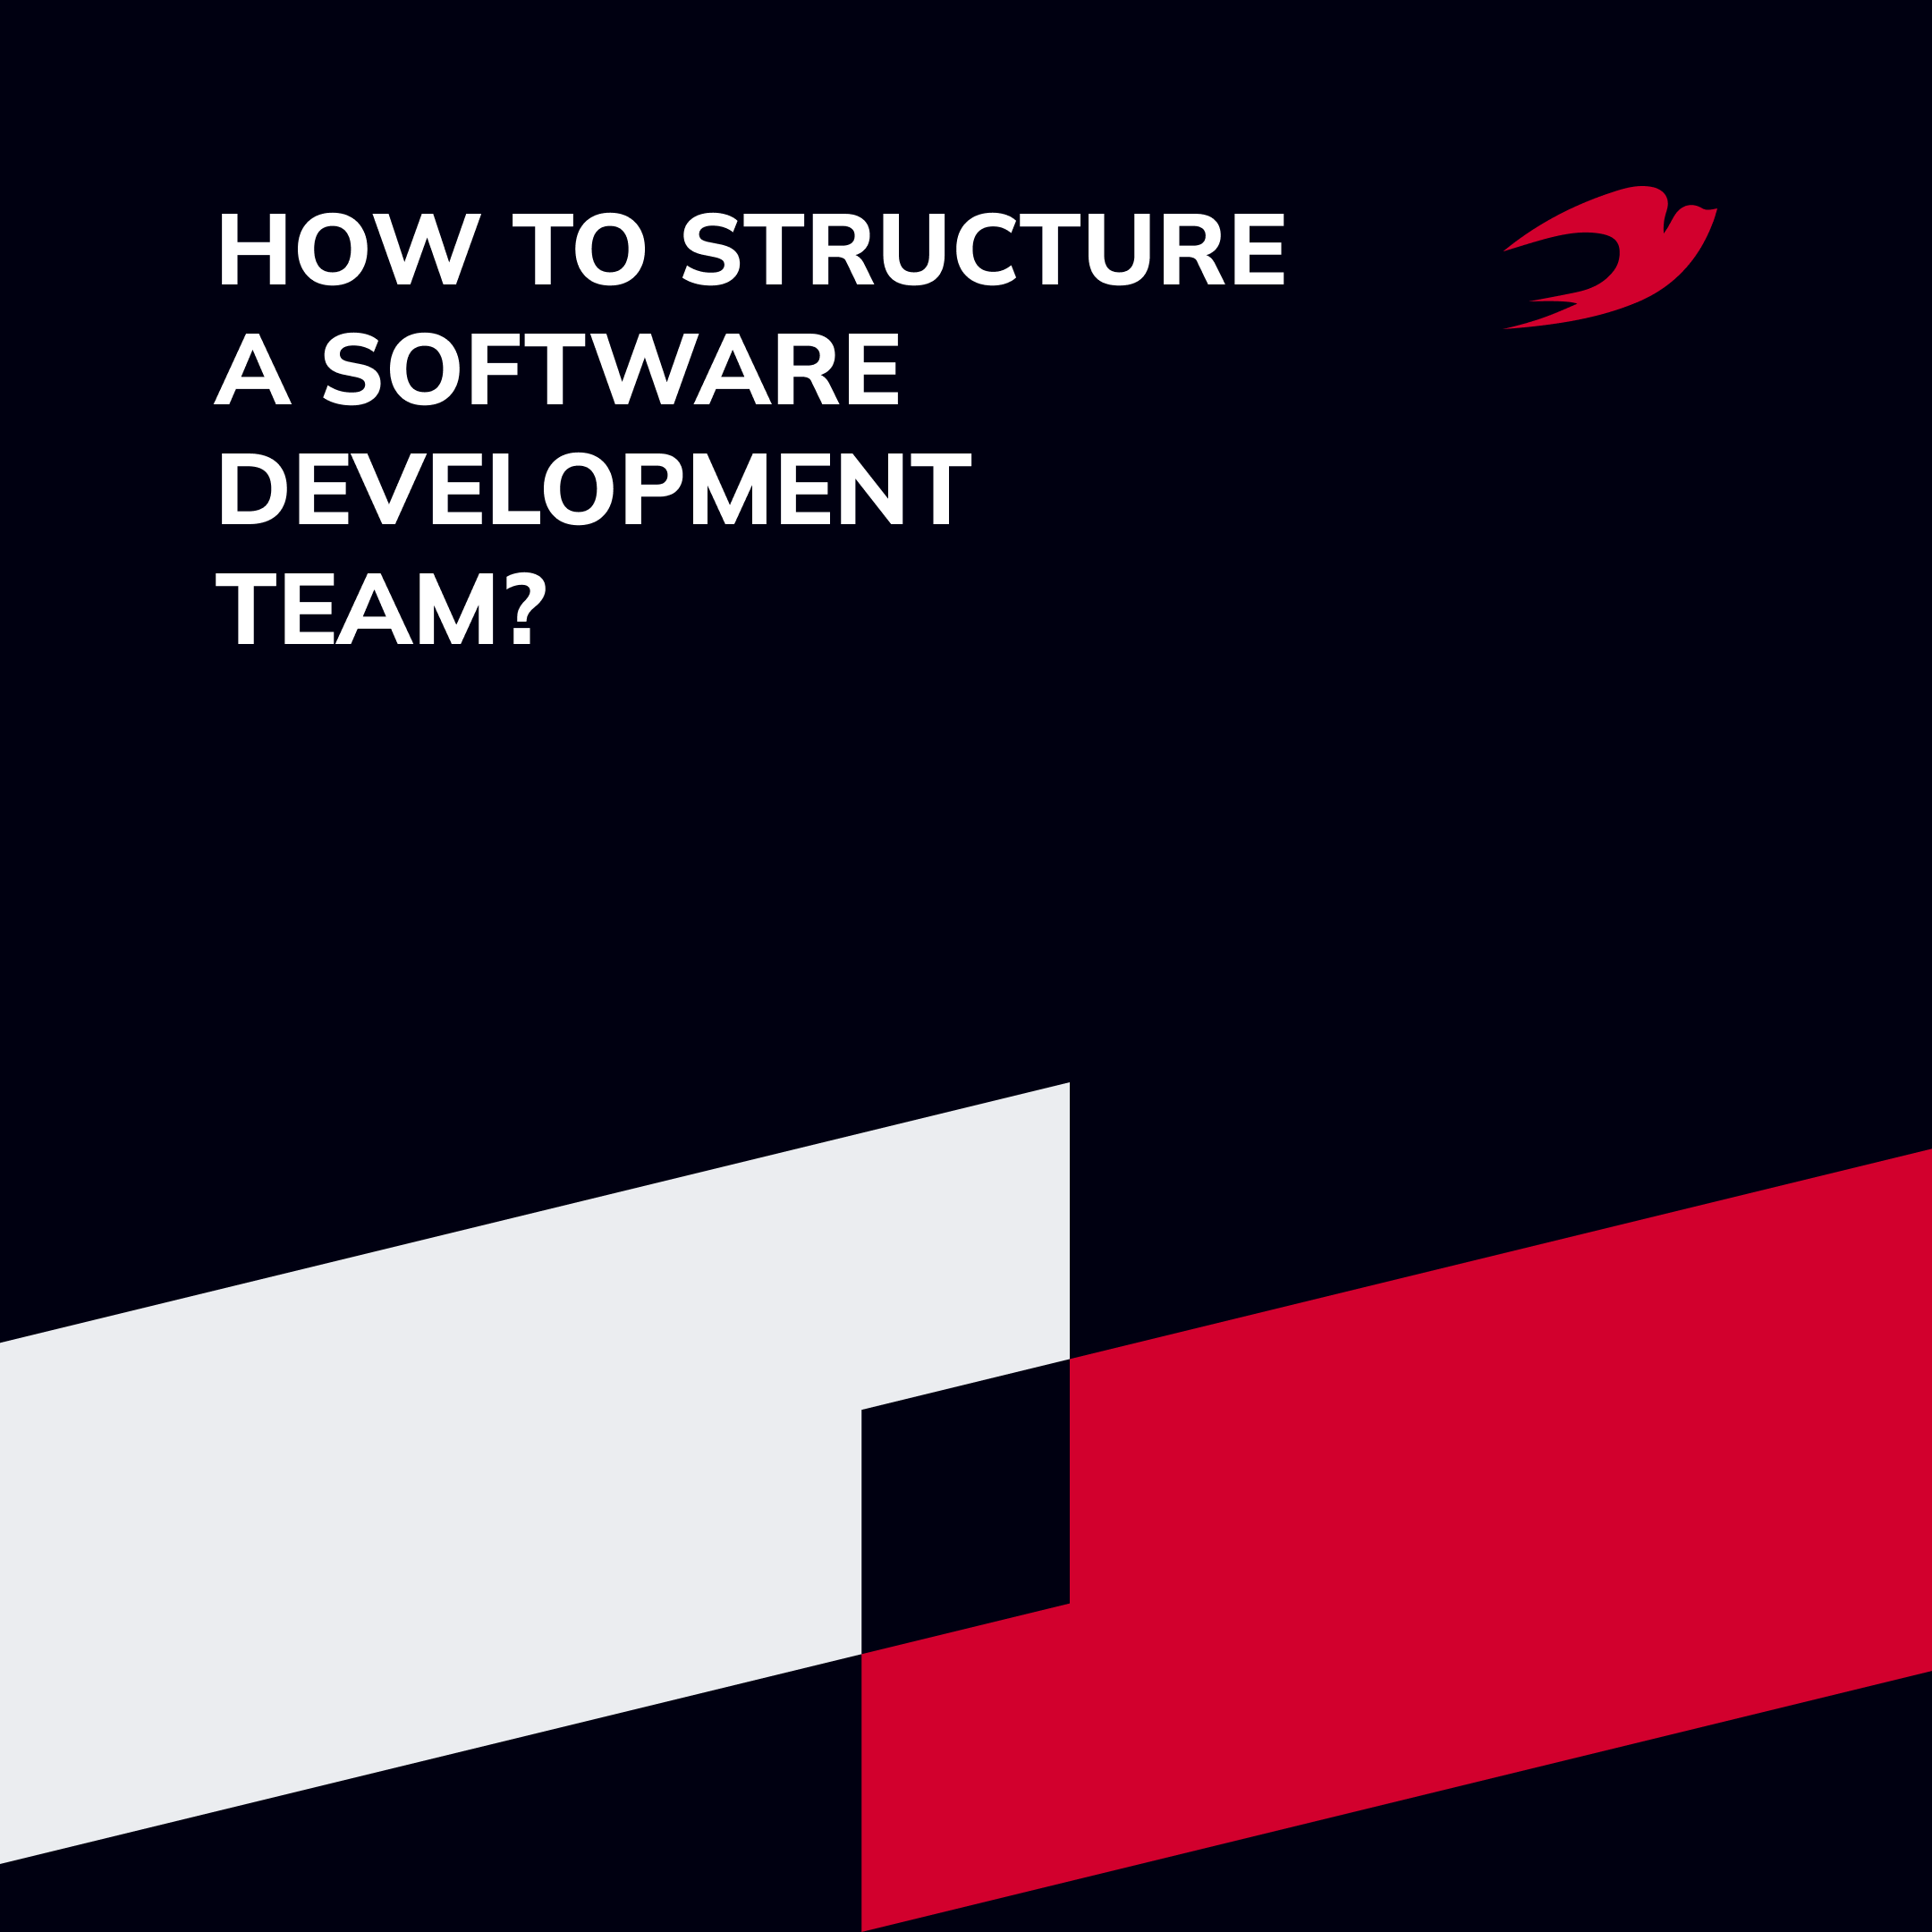 How to Structure a Software Development Team